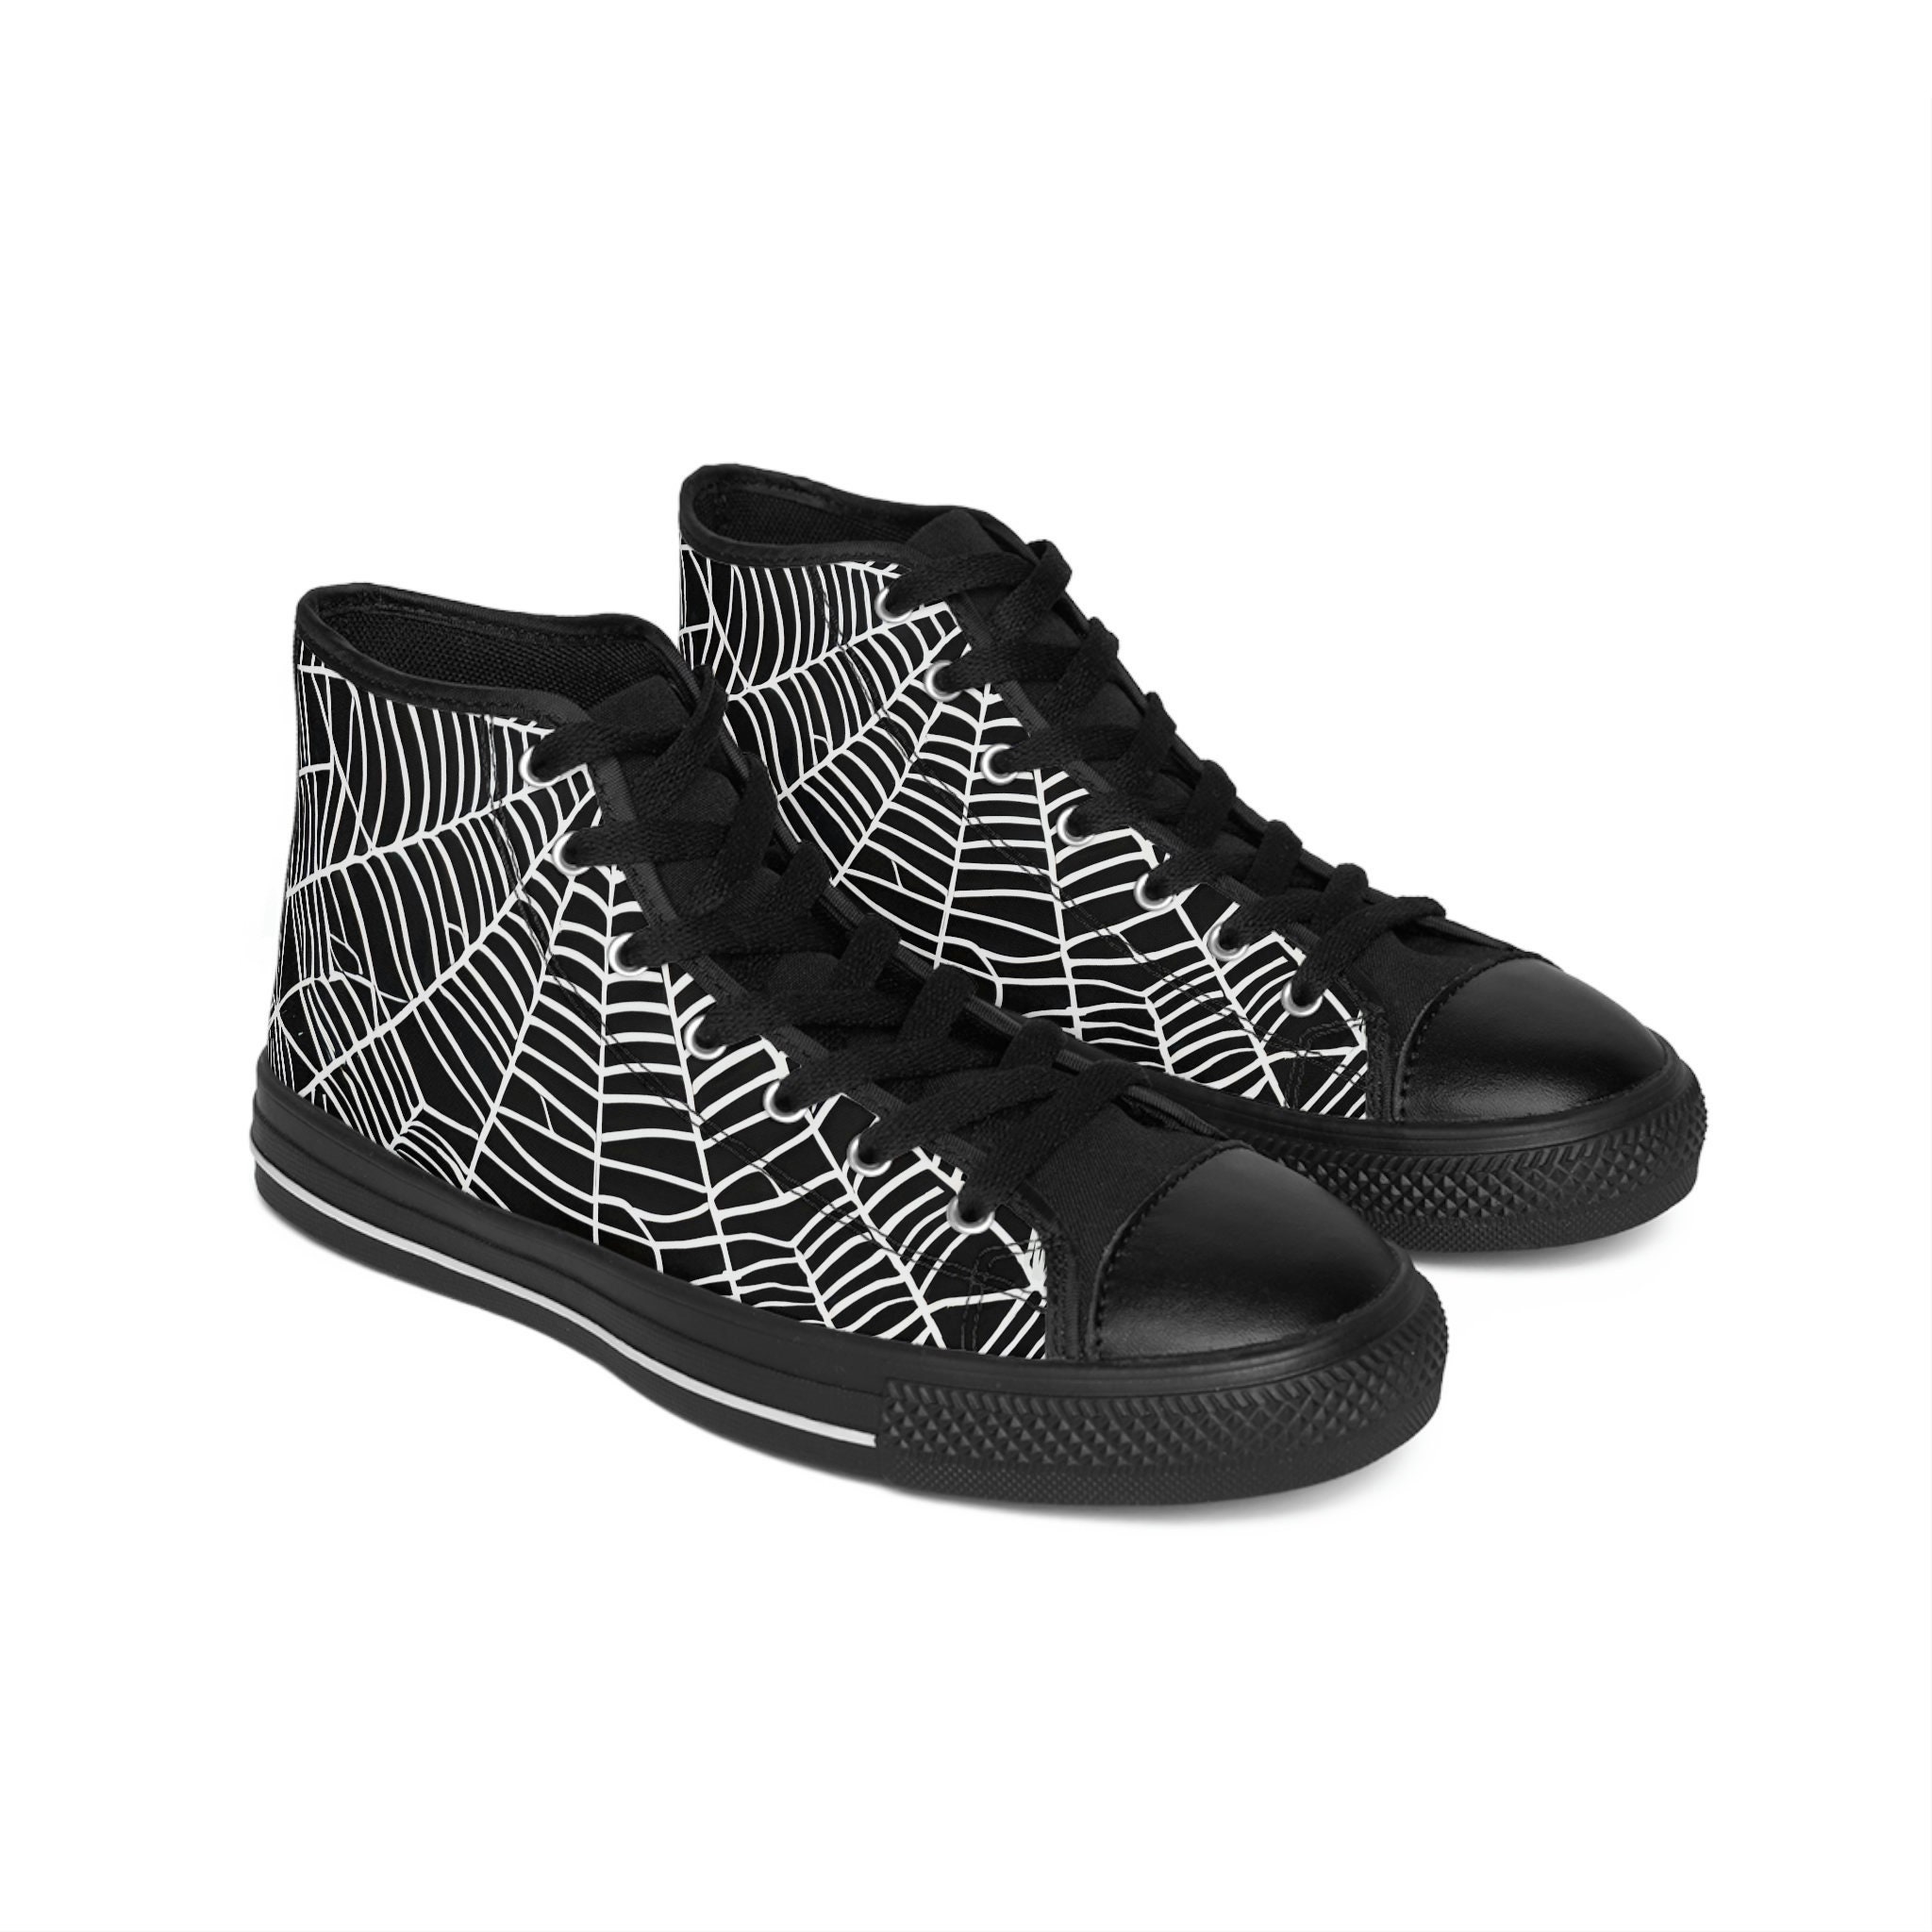 Halloween Shoes, Orange Black Costume Sneakers Spiderweb Bat Creepy Spooky  Classic Canvas High Tops, All Hallows Eve, Retro Mens Outfit 